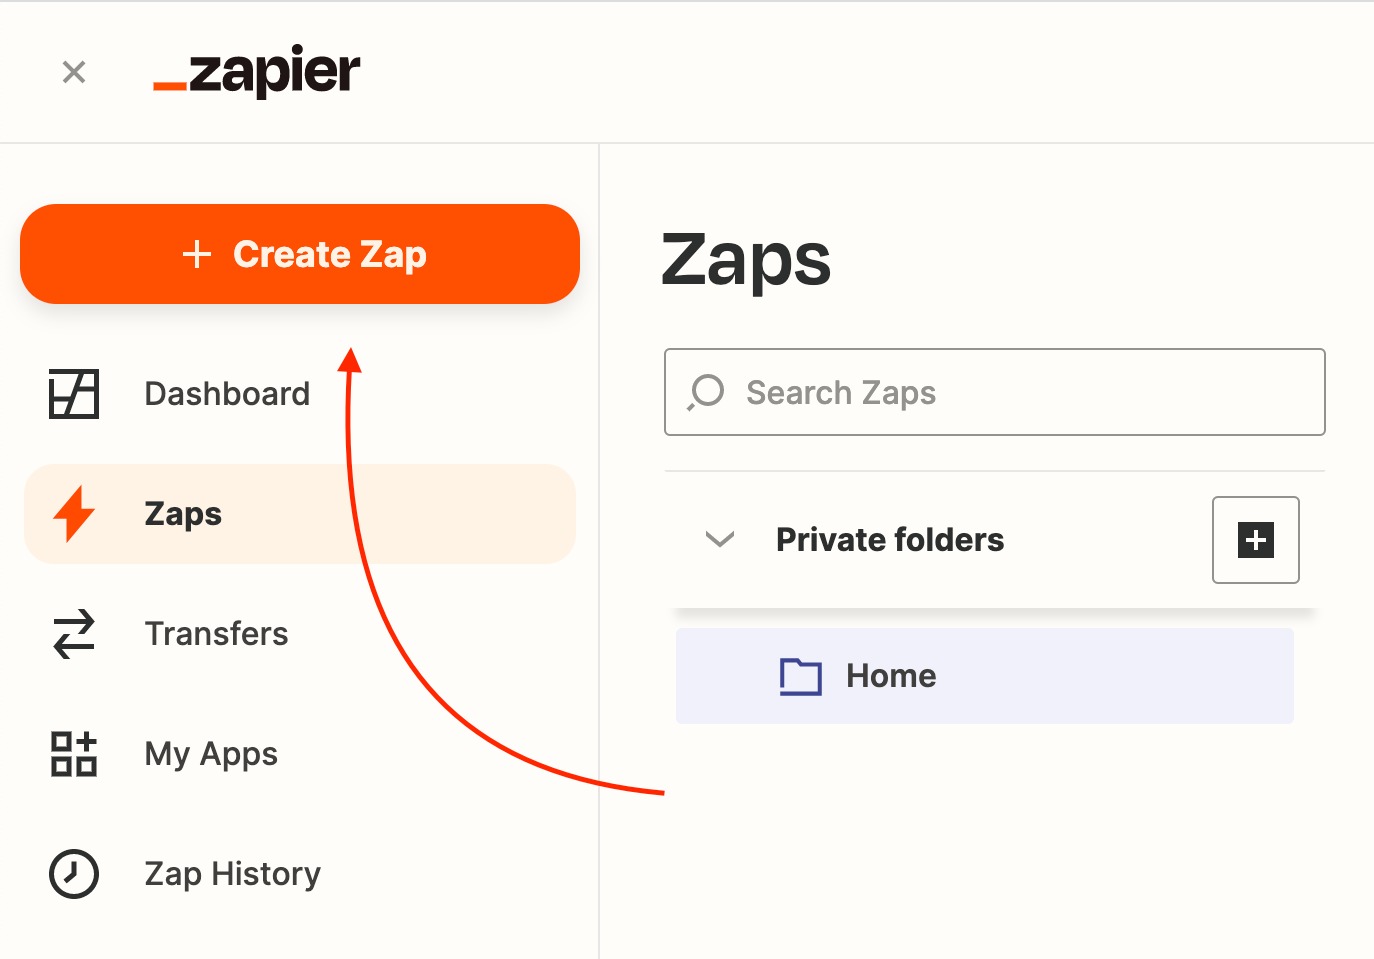 Screenshot from Zapier with a red arrow pointing to the "Create Zap" button in the top right corner.